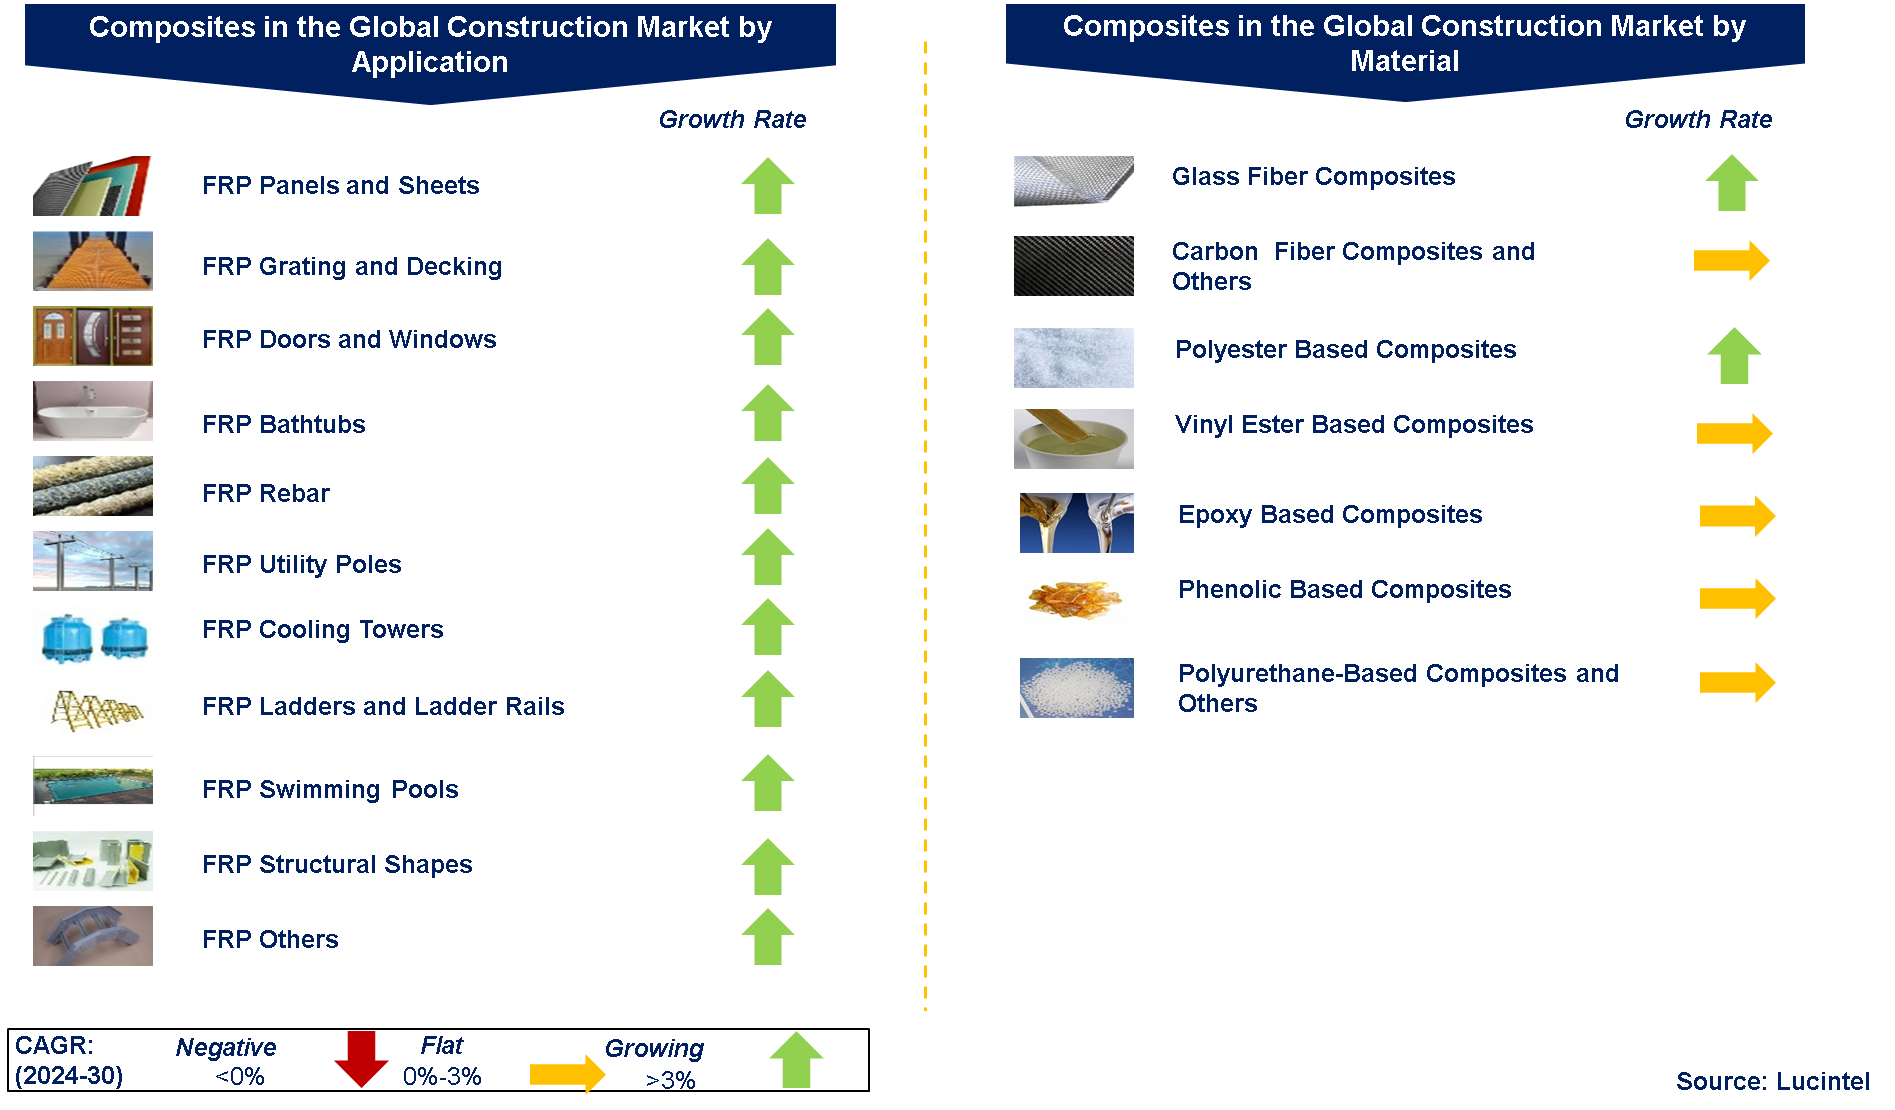 Composites in the Global Construction Market by Segments